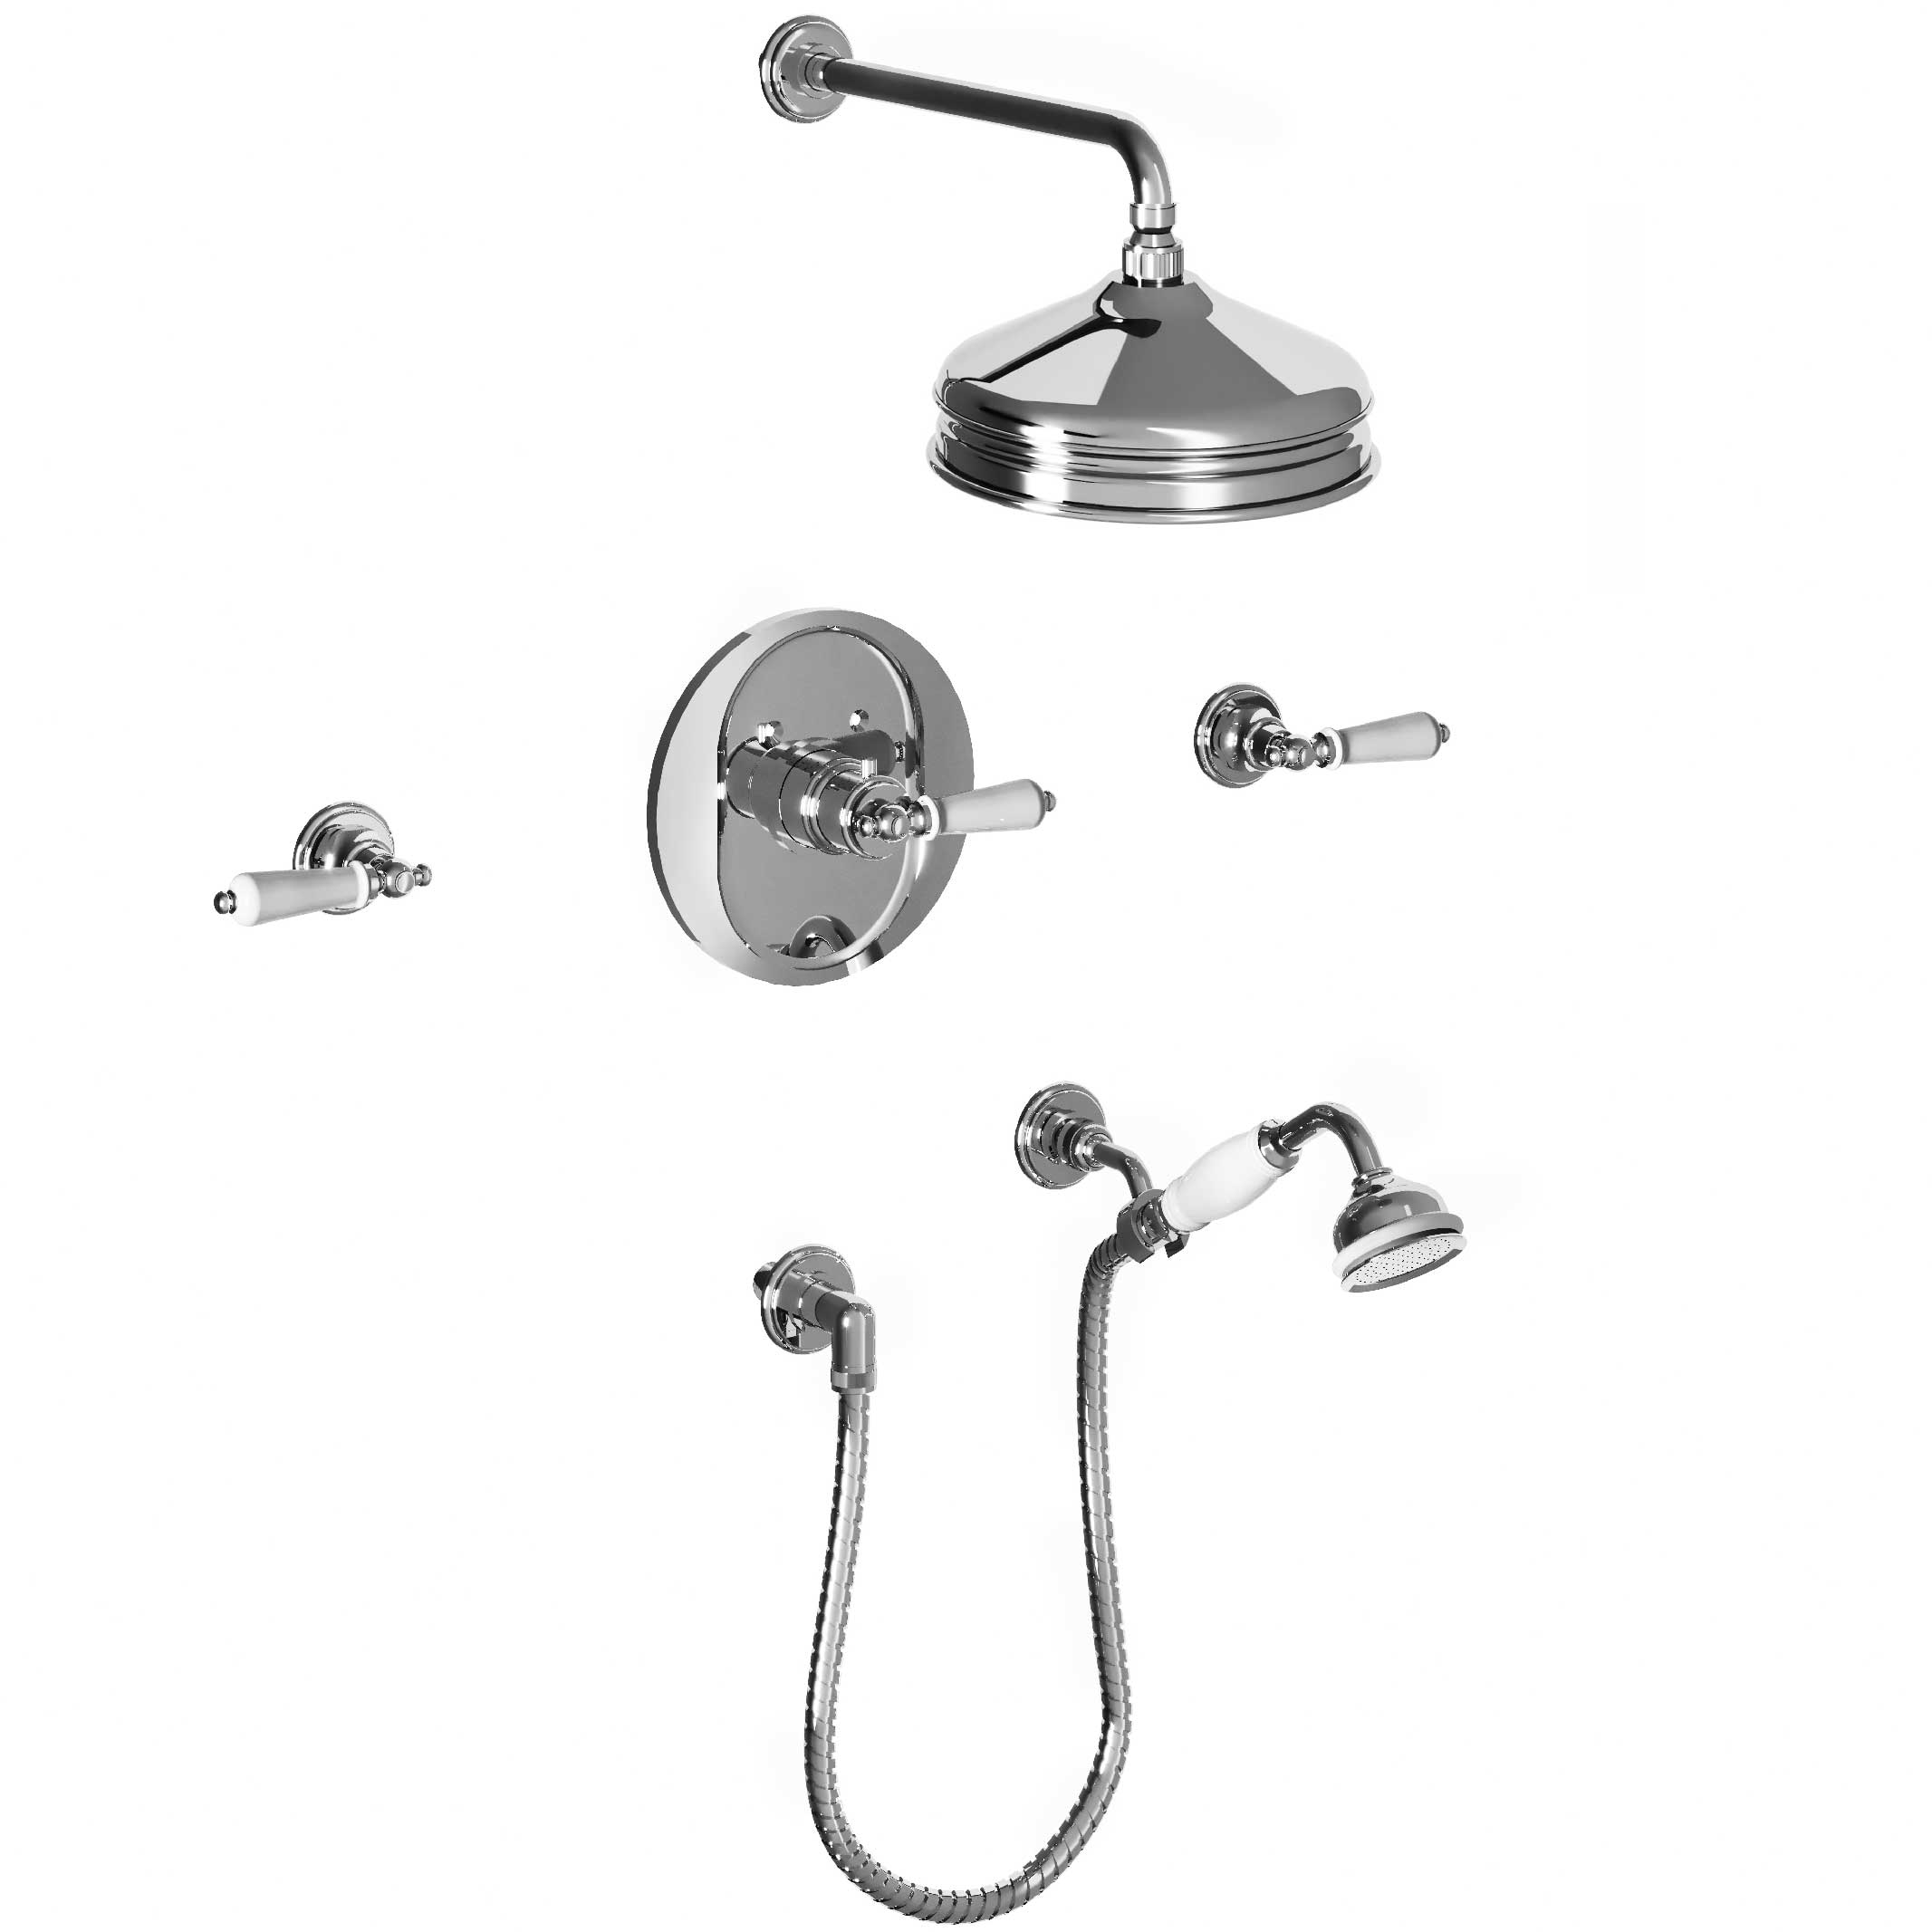 M32-2308T1 Thermostatic shower mixer package